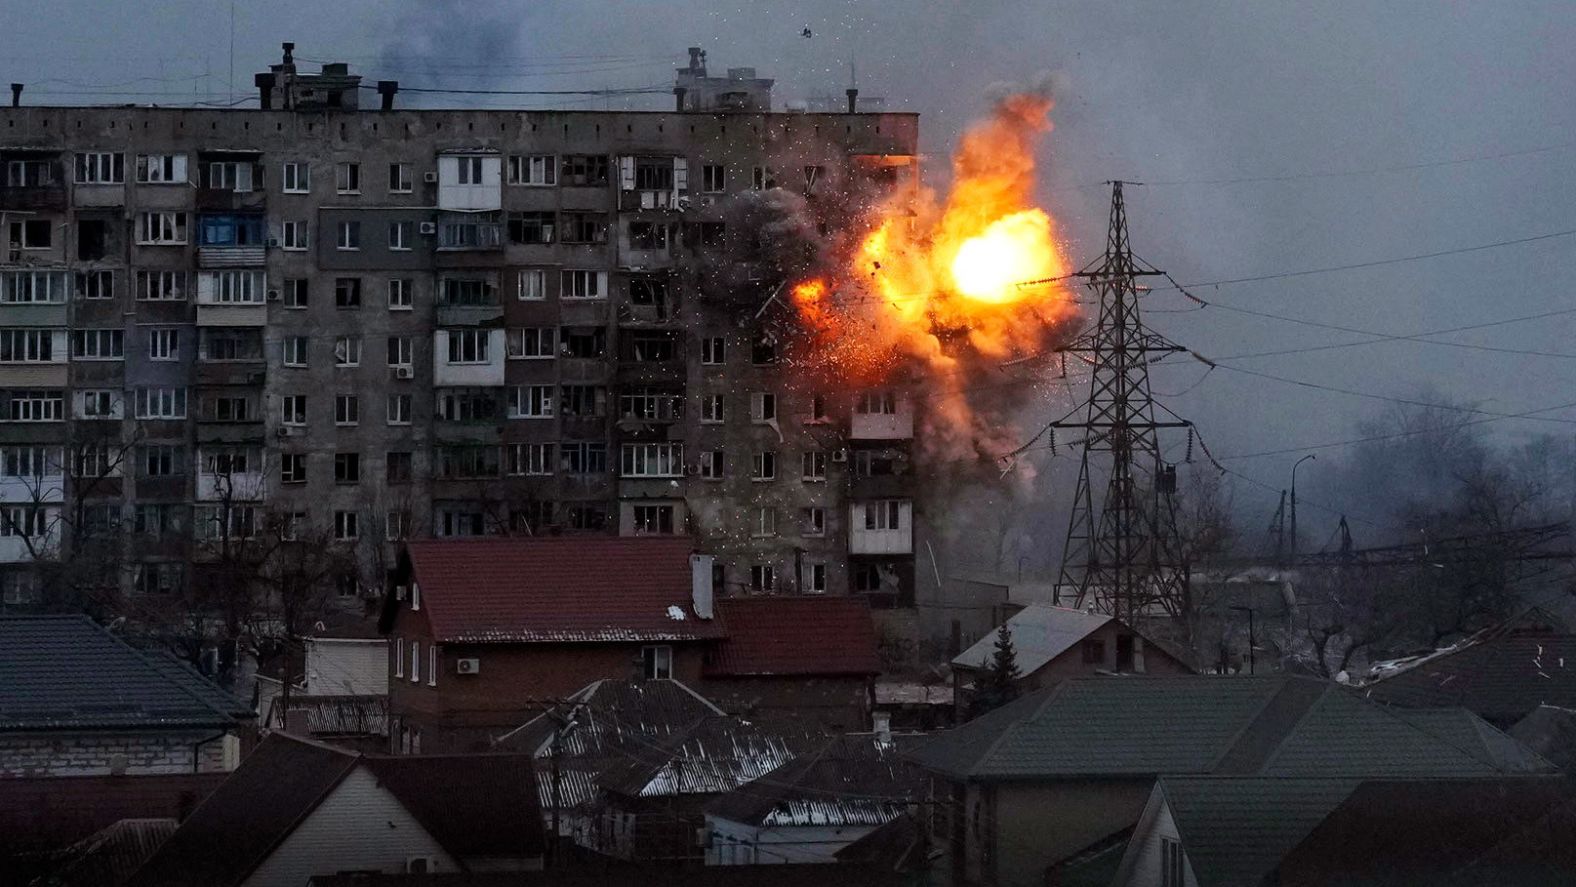 An explosion is seen at an apartment building in Mariupol on March 11. The city in southeastern Ukraine has been <a href="index.php?page=&url=https%3A%2F%2Fwww.cnn.com%2F2022%2F03%2F10%2Feurope%2Frussia-invasion-ukraine-03-10-intl%2Findex.html" target="_blank">besieged by Russian forces.</a>